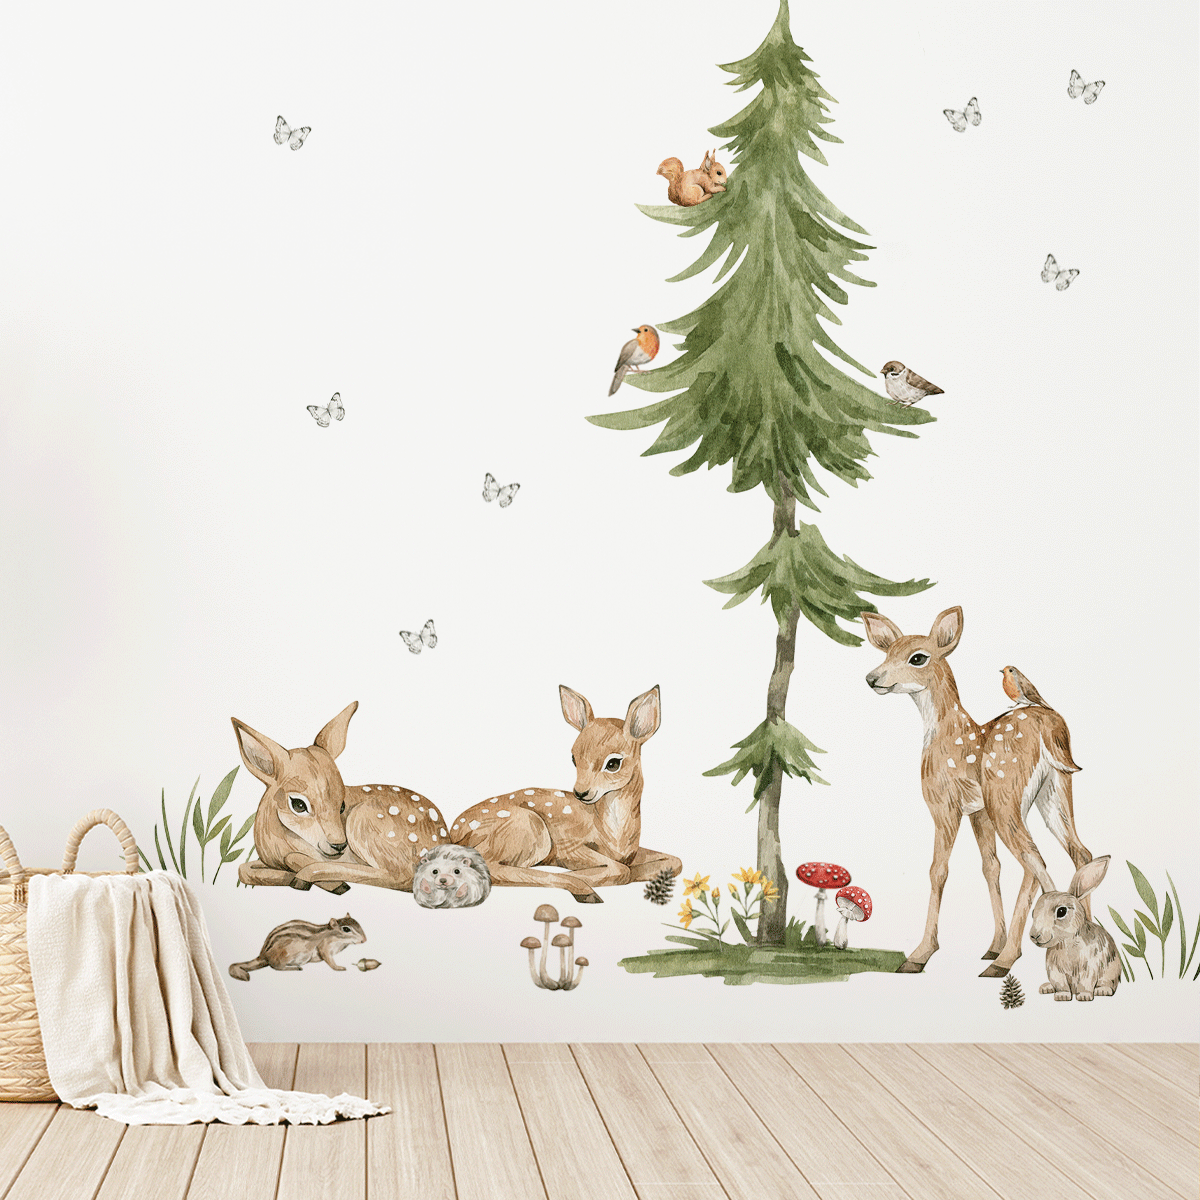 Woodland wall stickers - Magical forest - deer with tree